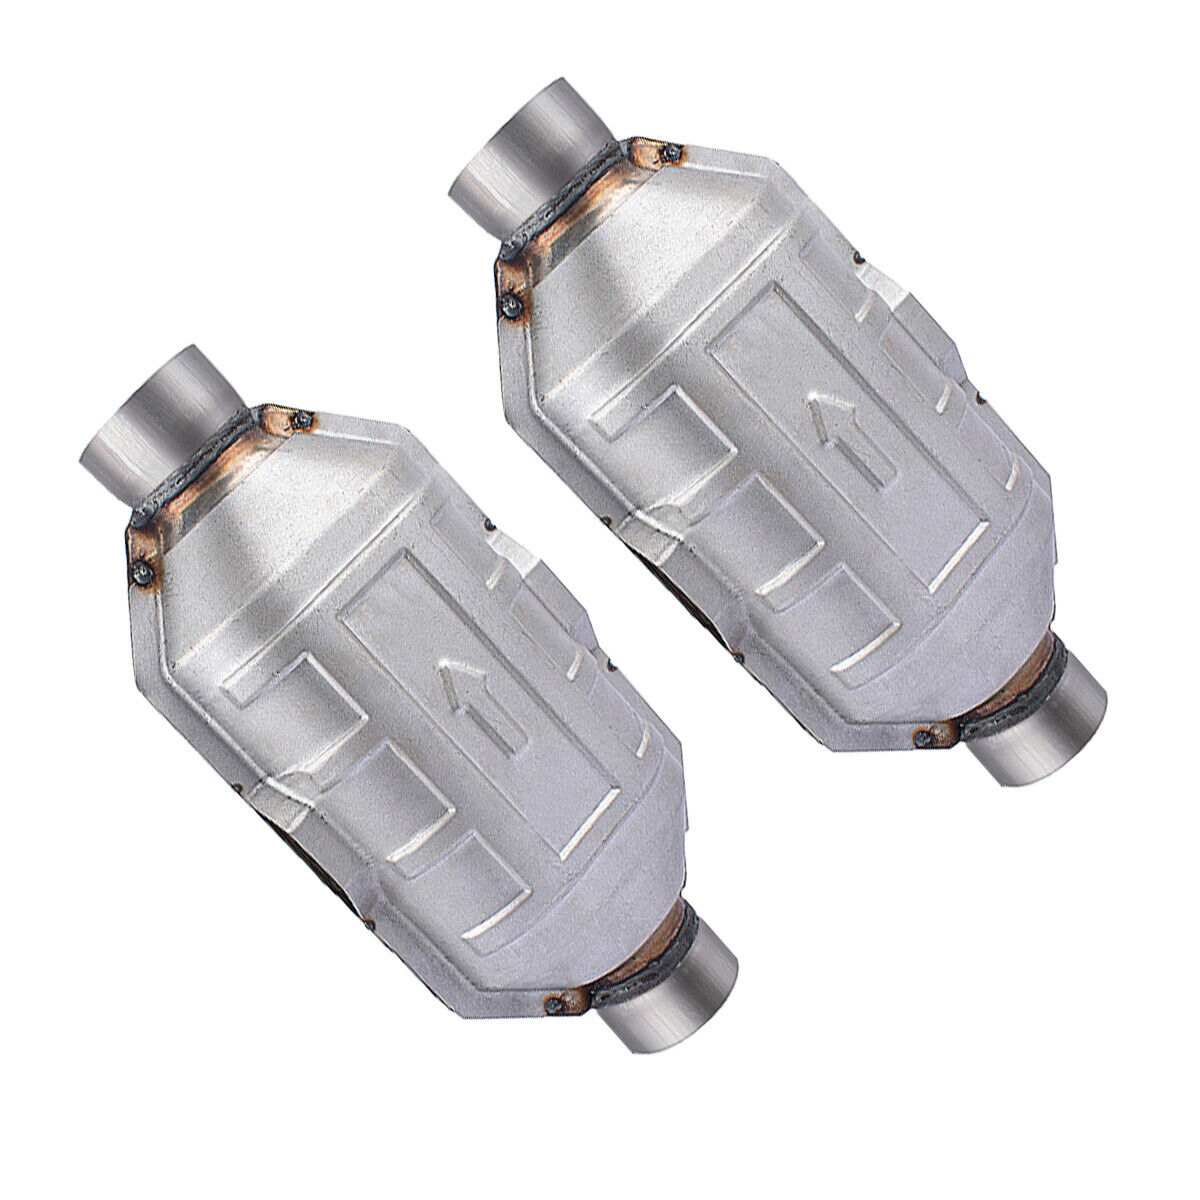 2PCS 2.5 Inch Universal Catalytic Converter 410250 High Flow Stainless Steel